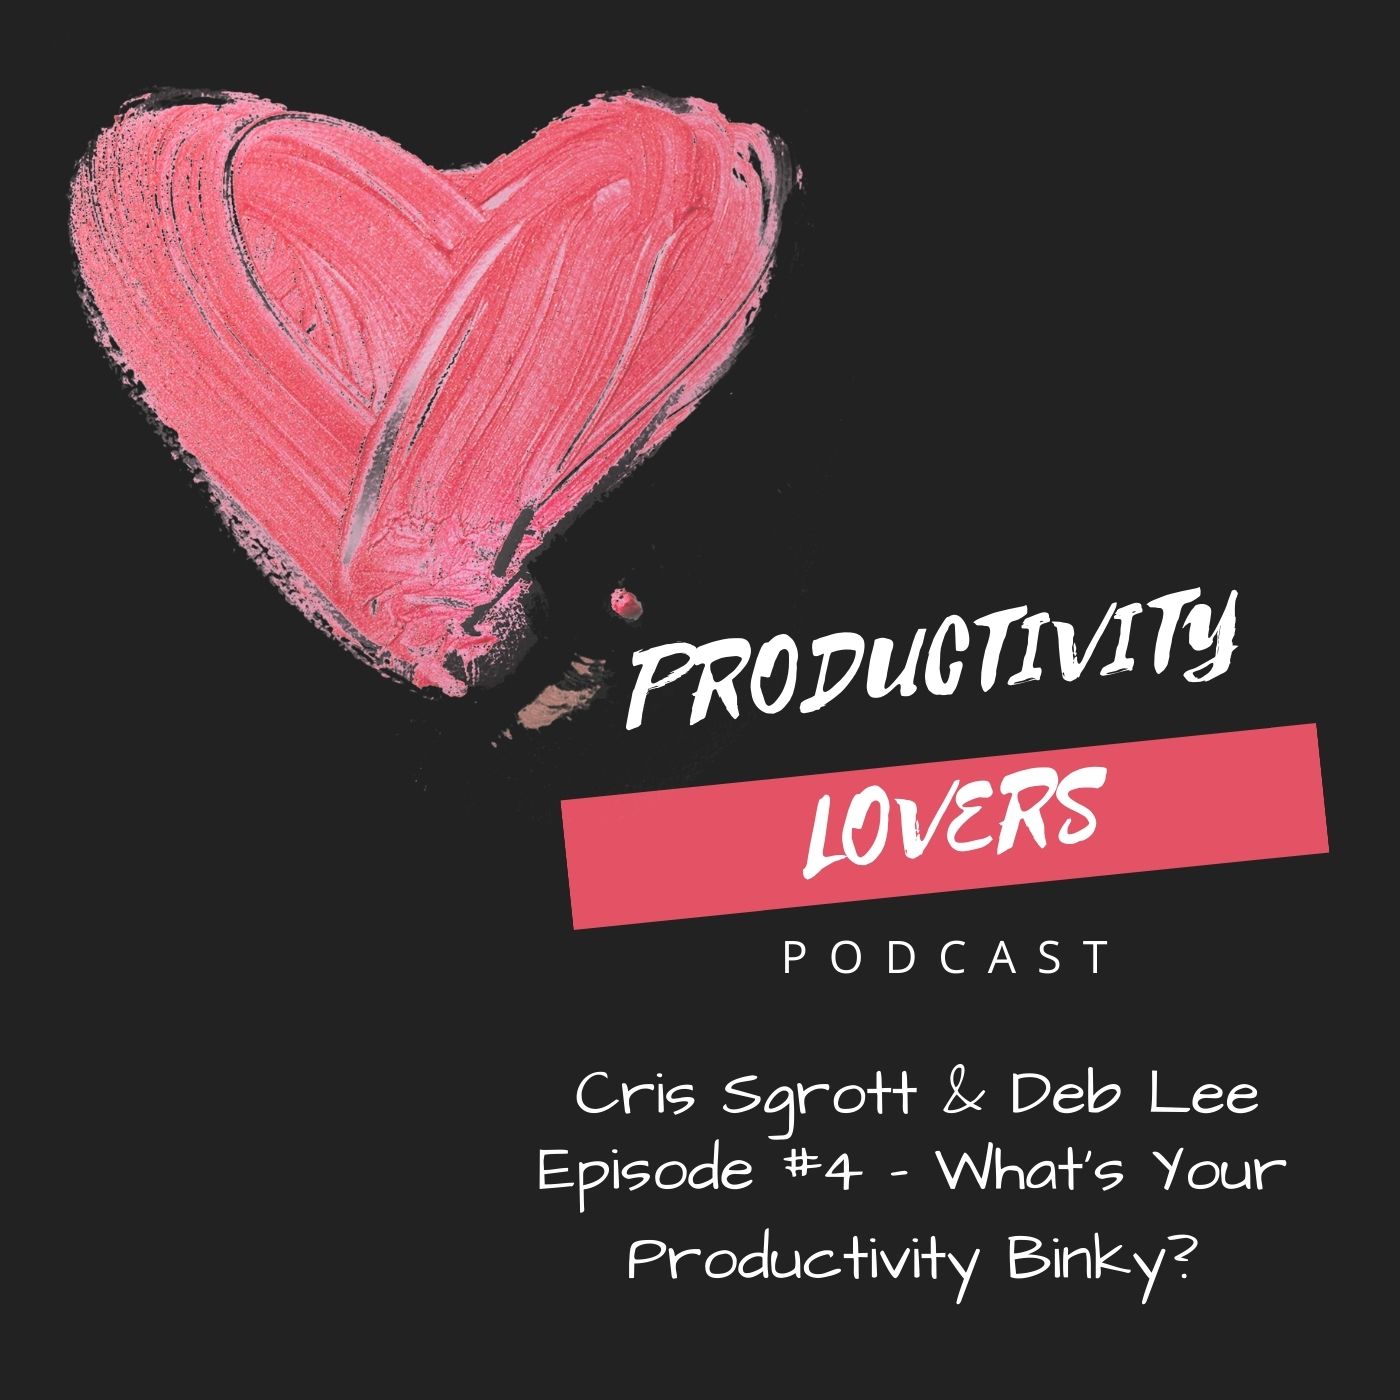 Episode #4 - What's Your Productivity Binky?